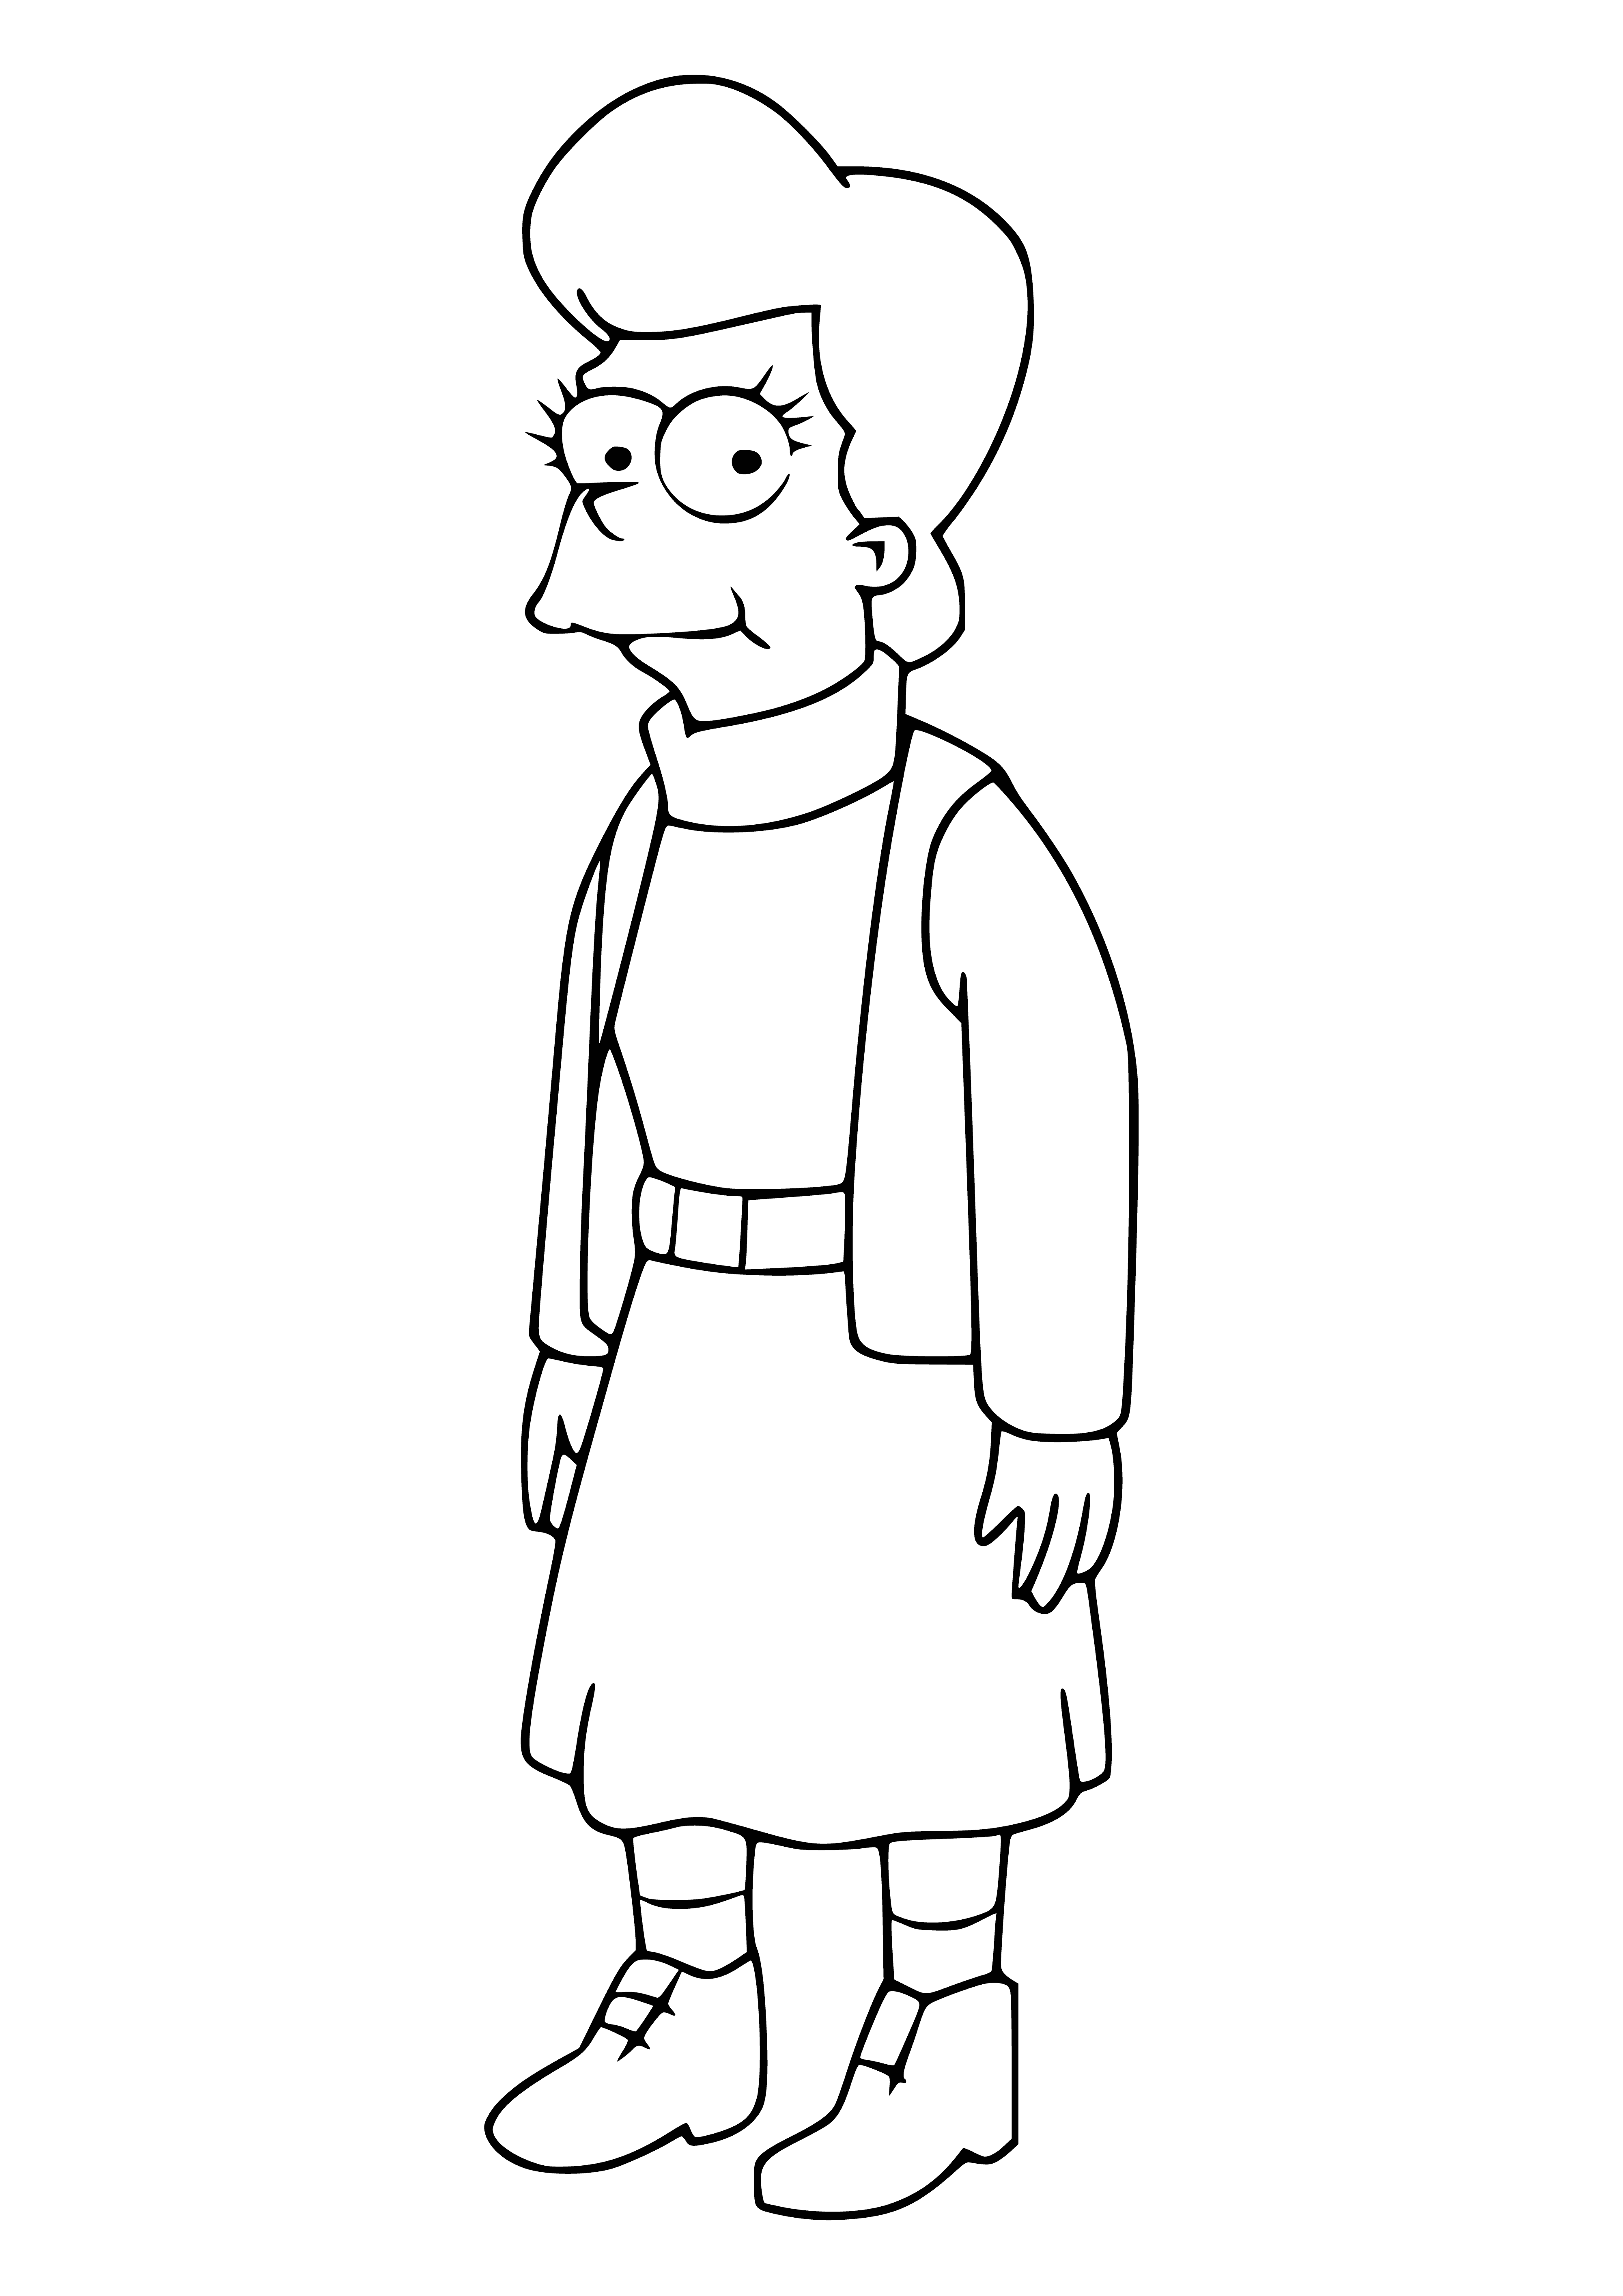 coloring page: Mona Simpson, Homer's elderly mother, shown in B/W coloring page wearing white shirt and black skirt, seated in chair with hands clasped in lap.